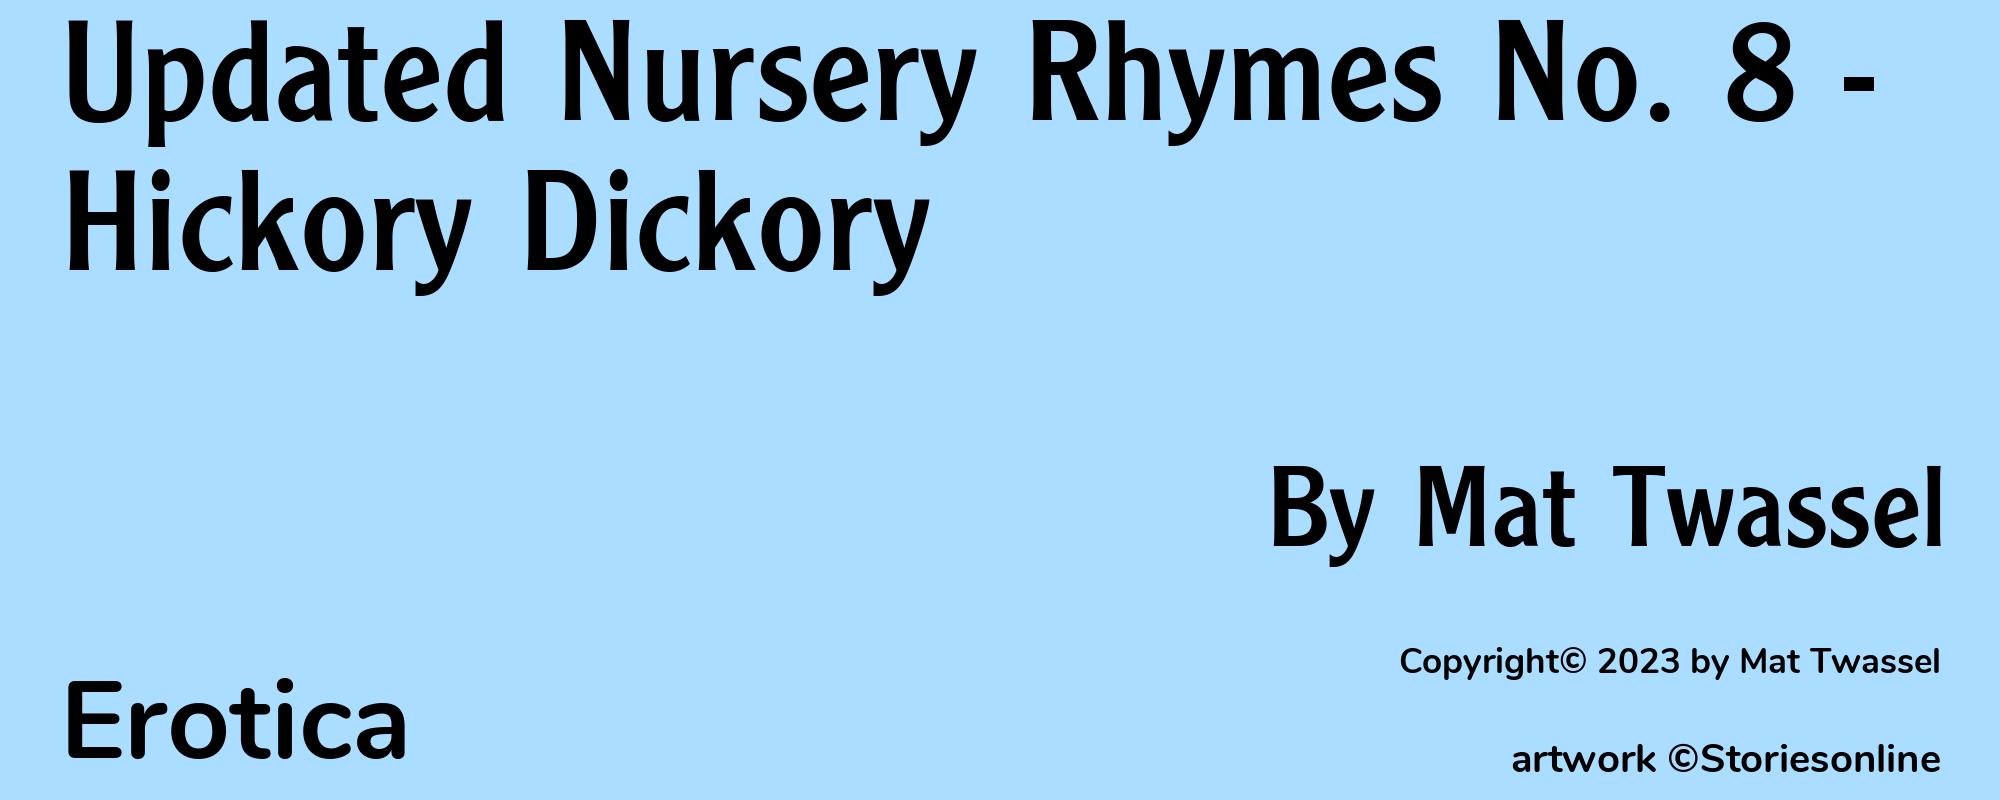 Updated Nursery Rhymes No. 8 - Hickory Dickory - Cover